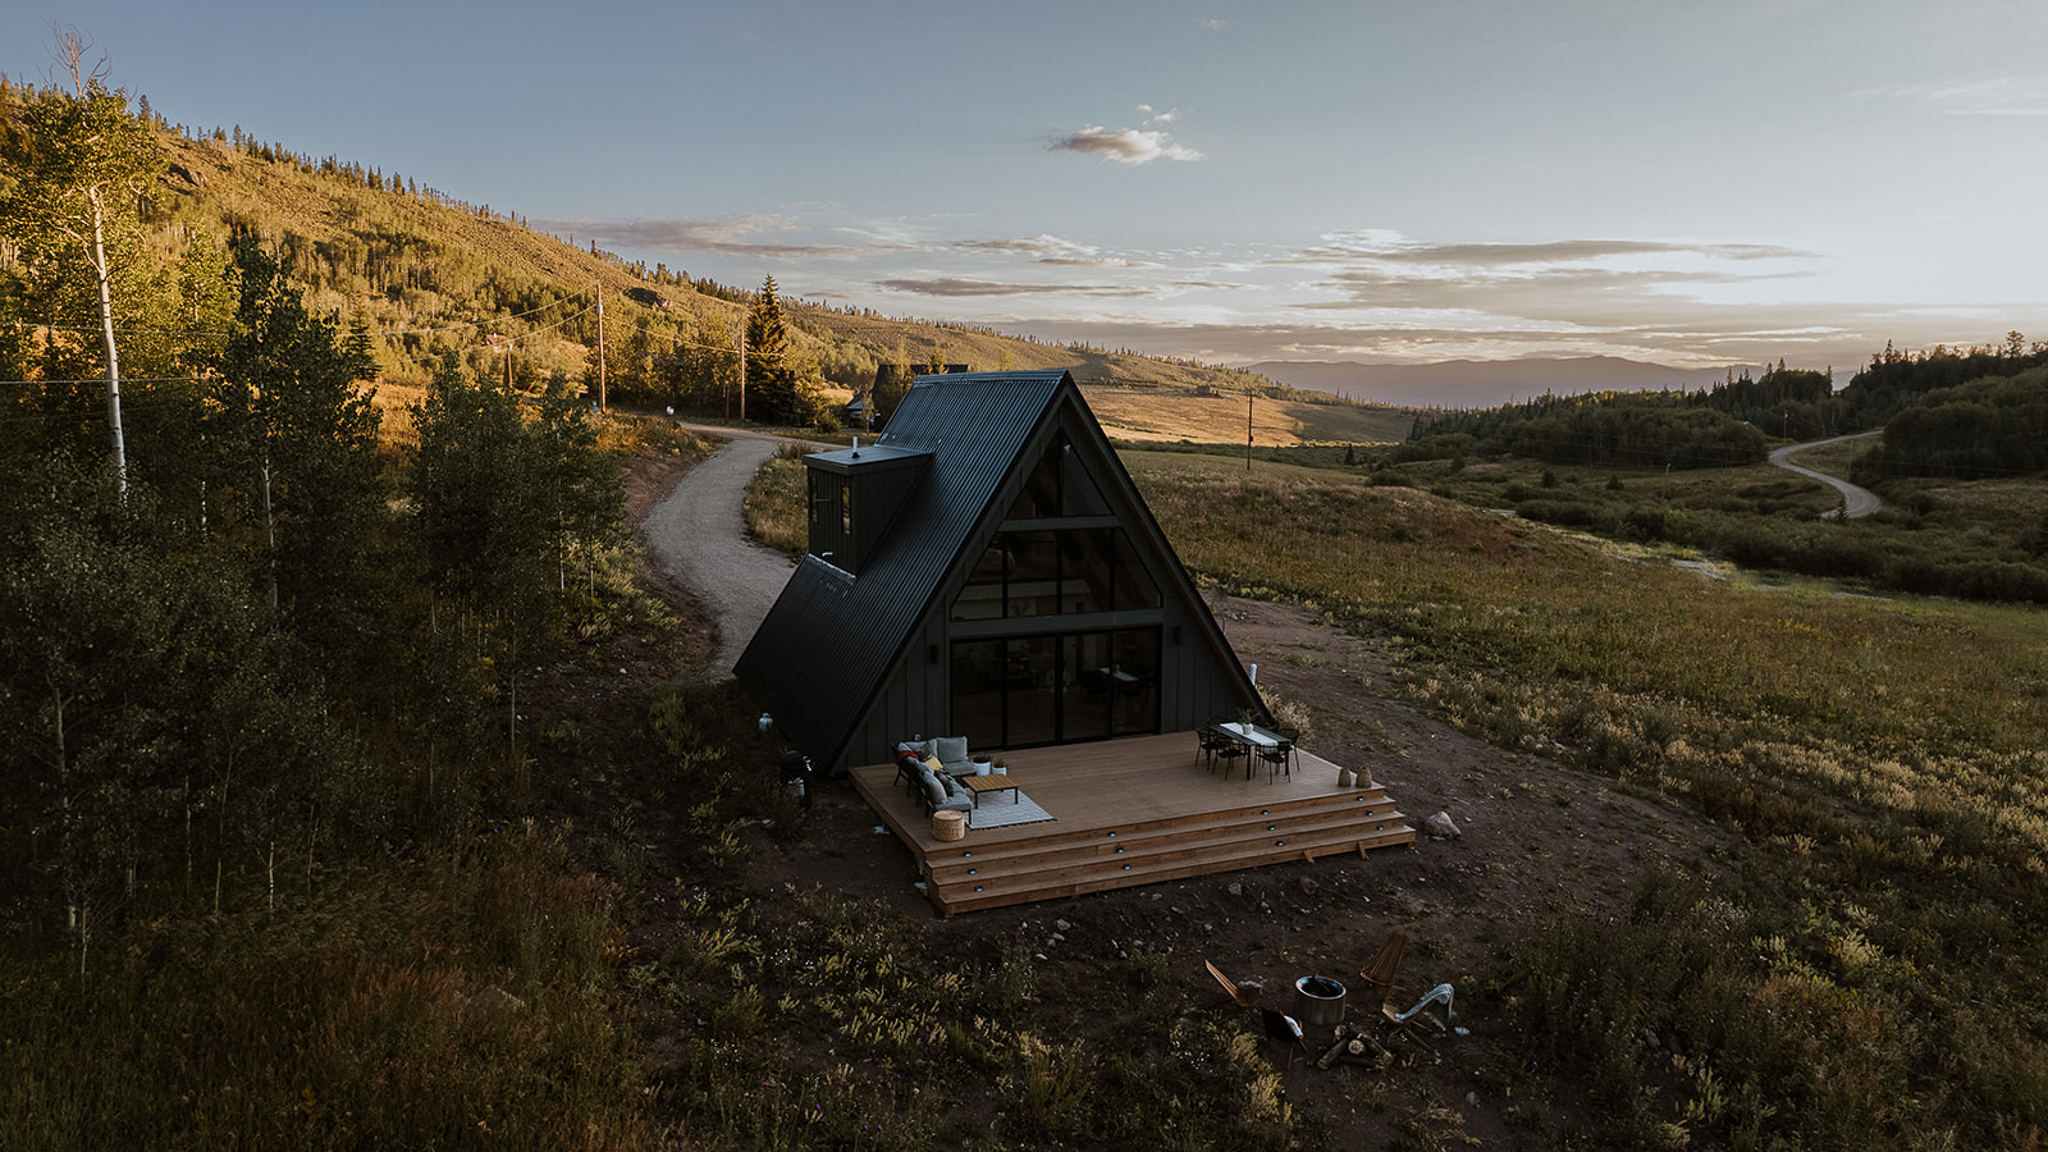 Basecamp Visual, a Breckenridge brand photographer, shares six of the best Colorado cabins to book a stay.